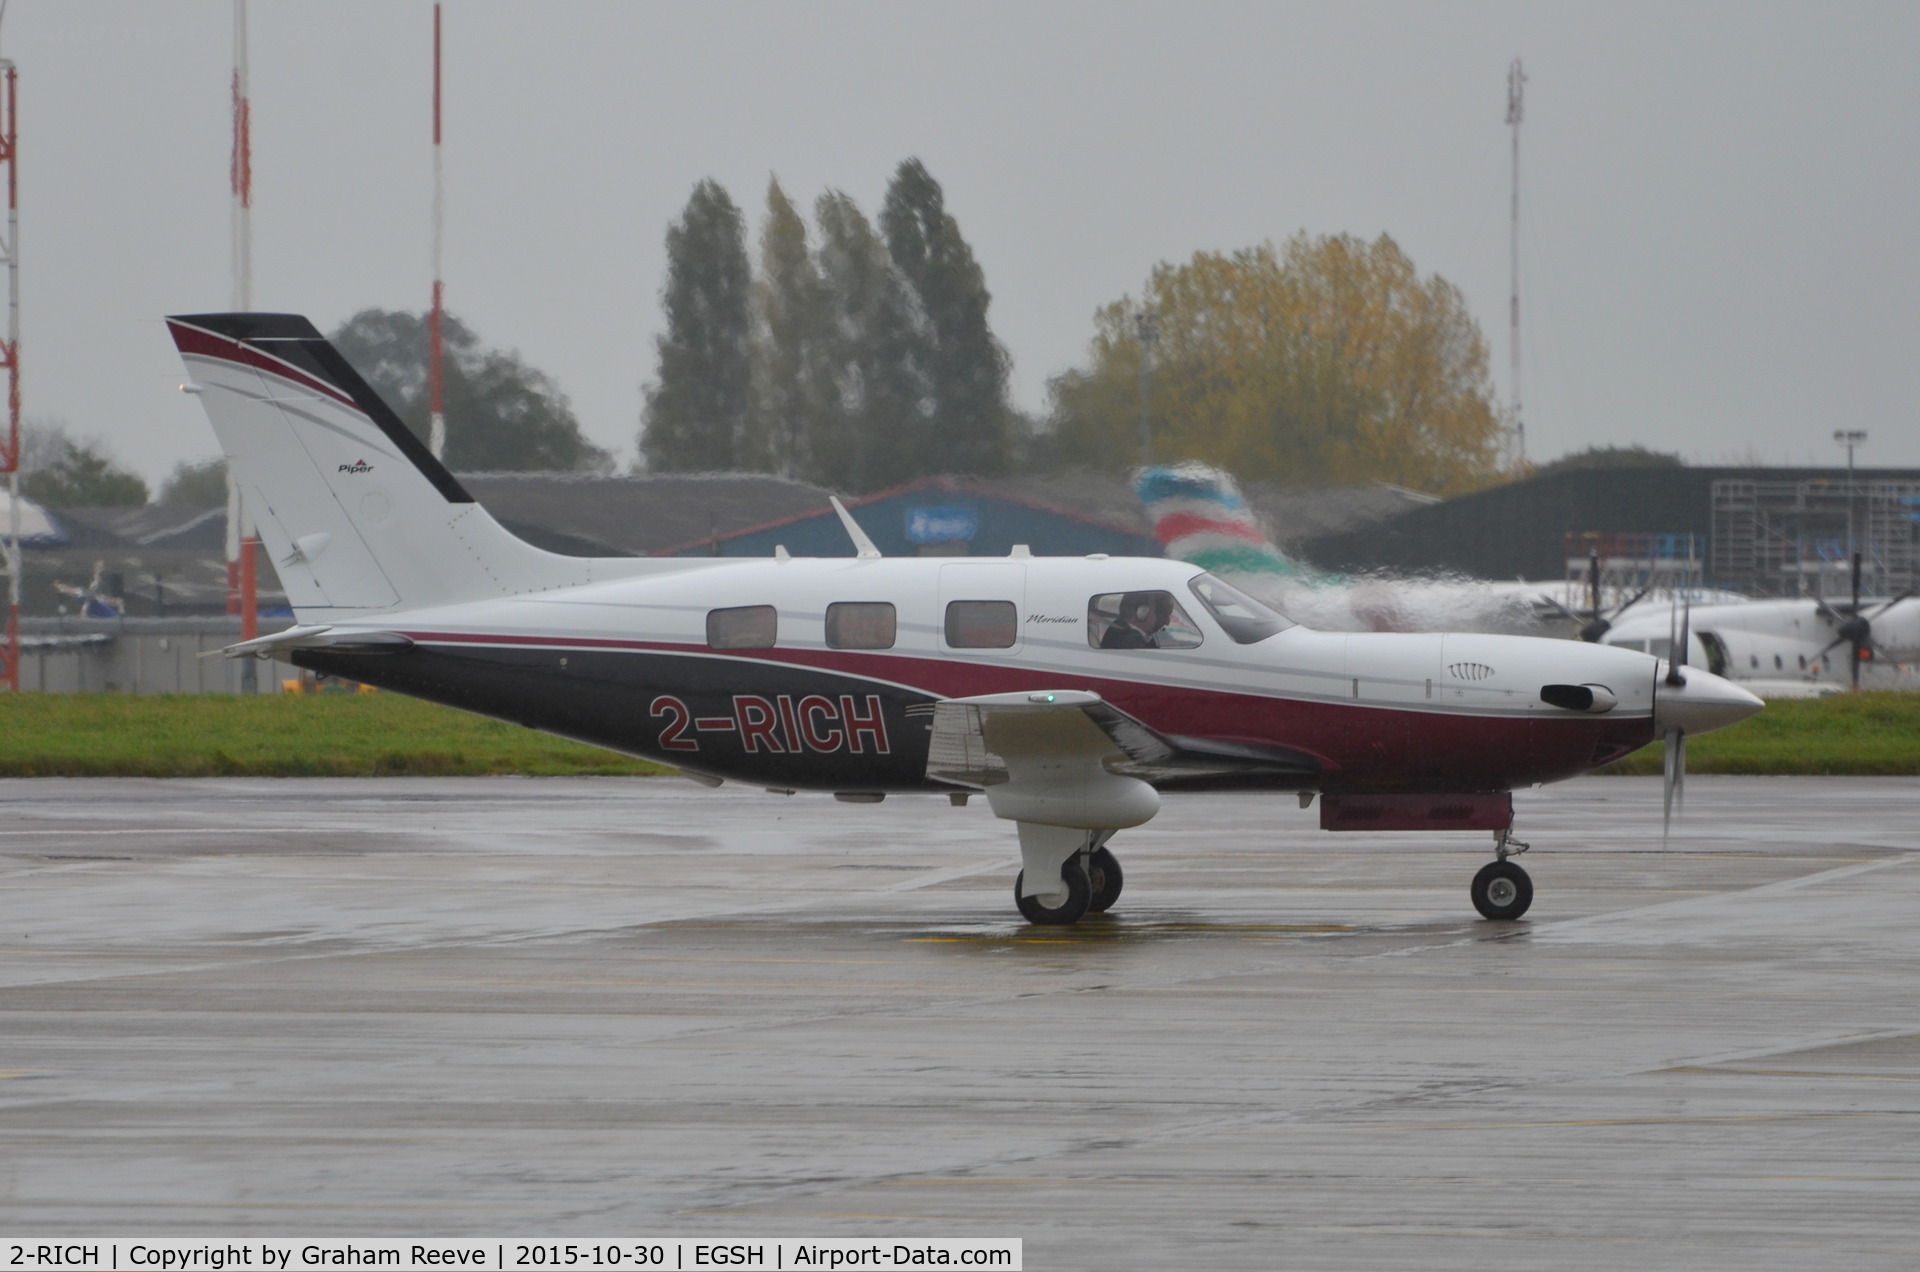 2-RICH, 2010 Piper PA-46-500TP Malibu Meridian C/N 4697425, Just landed at Norwich.